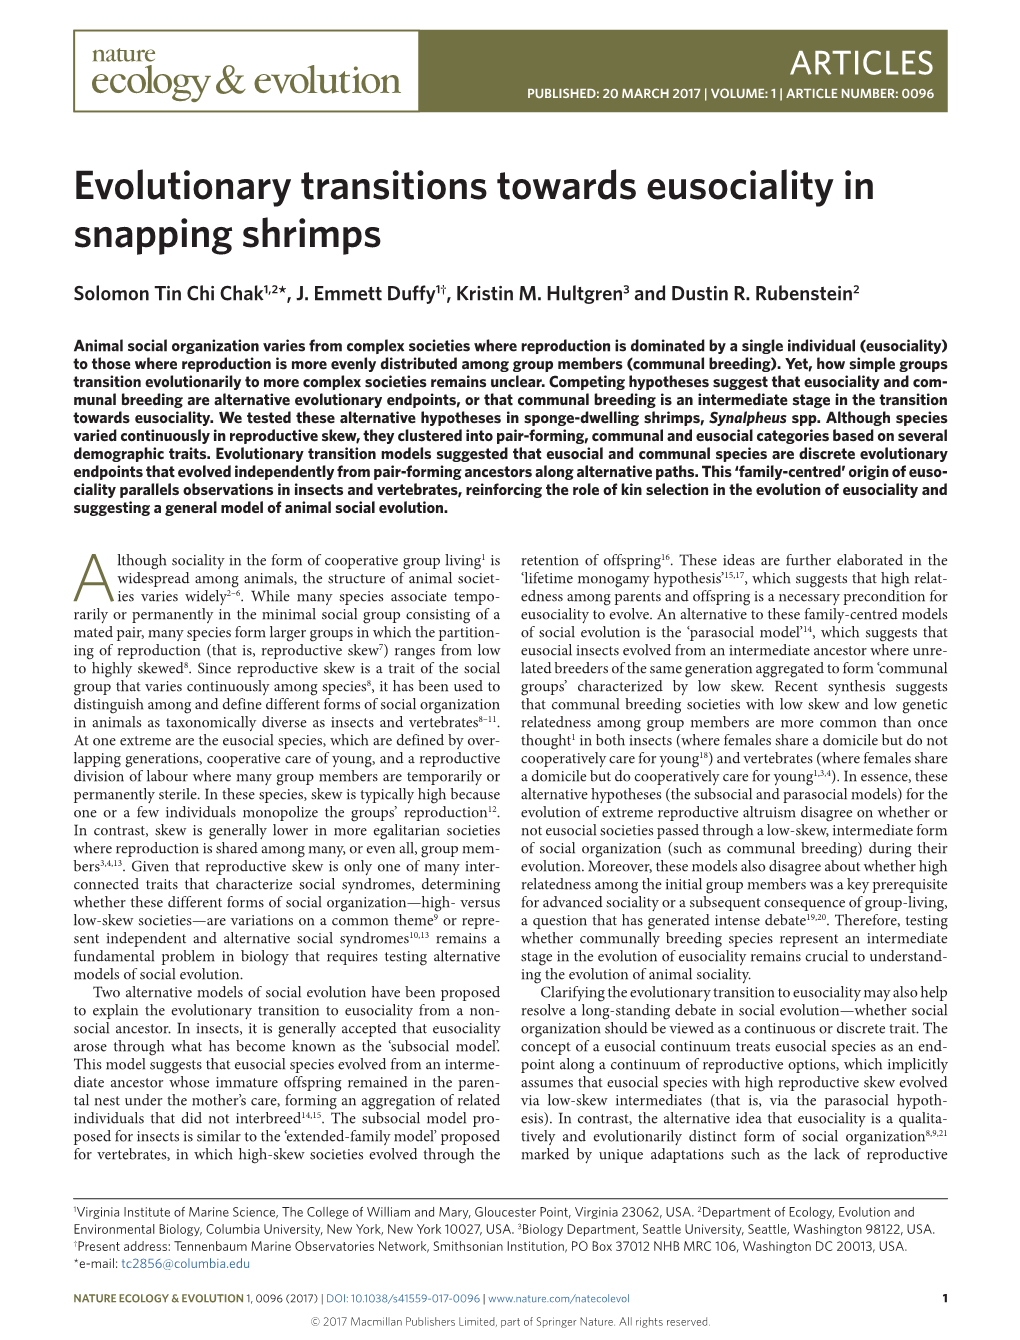 Evolutionary Transitions Towards Eusociality in Snapping Shrimps